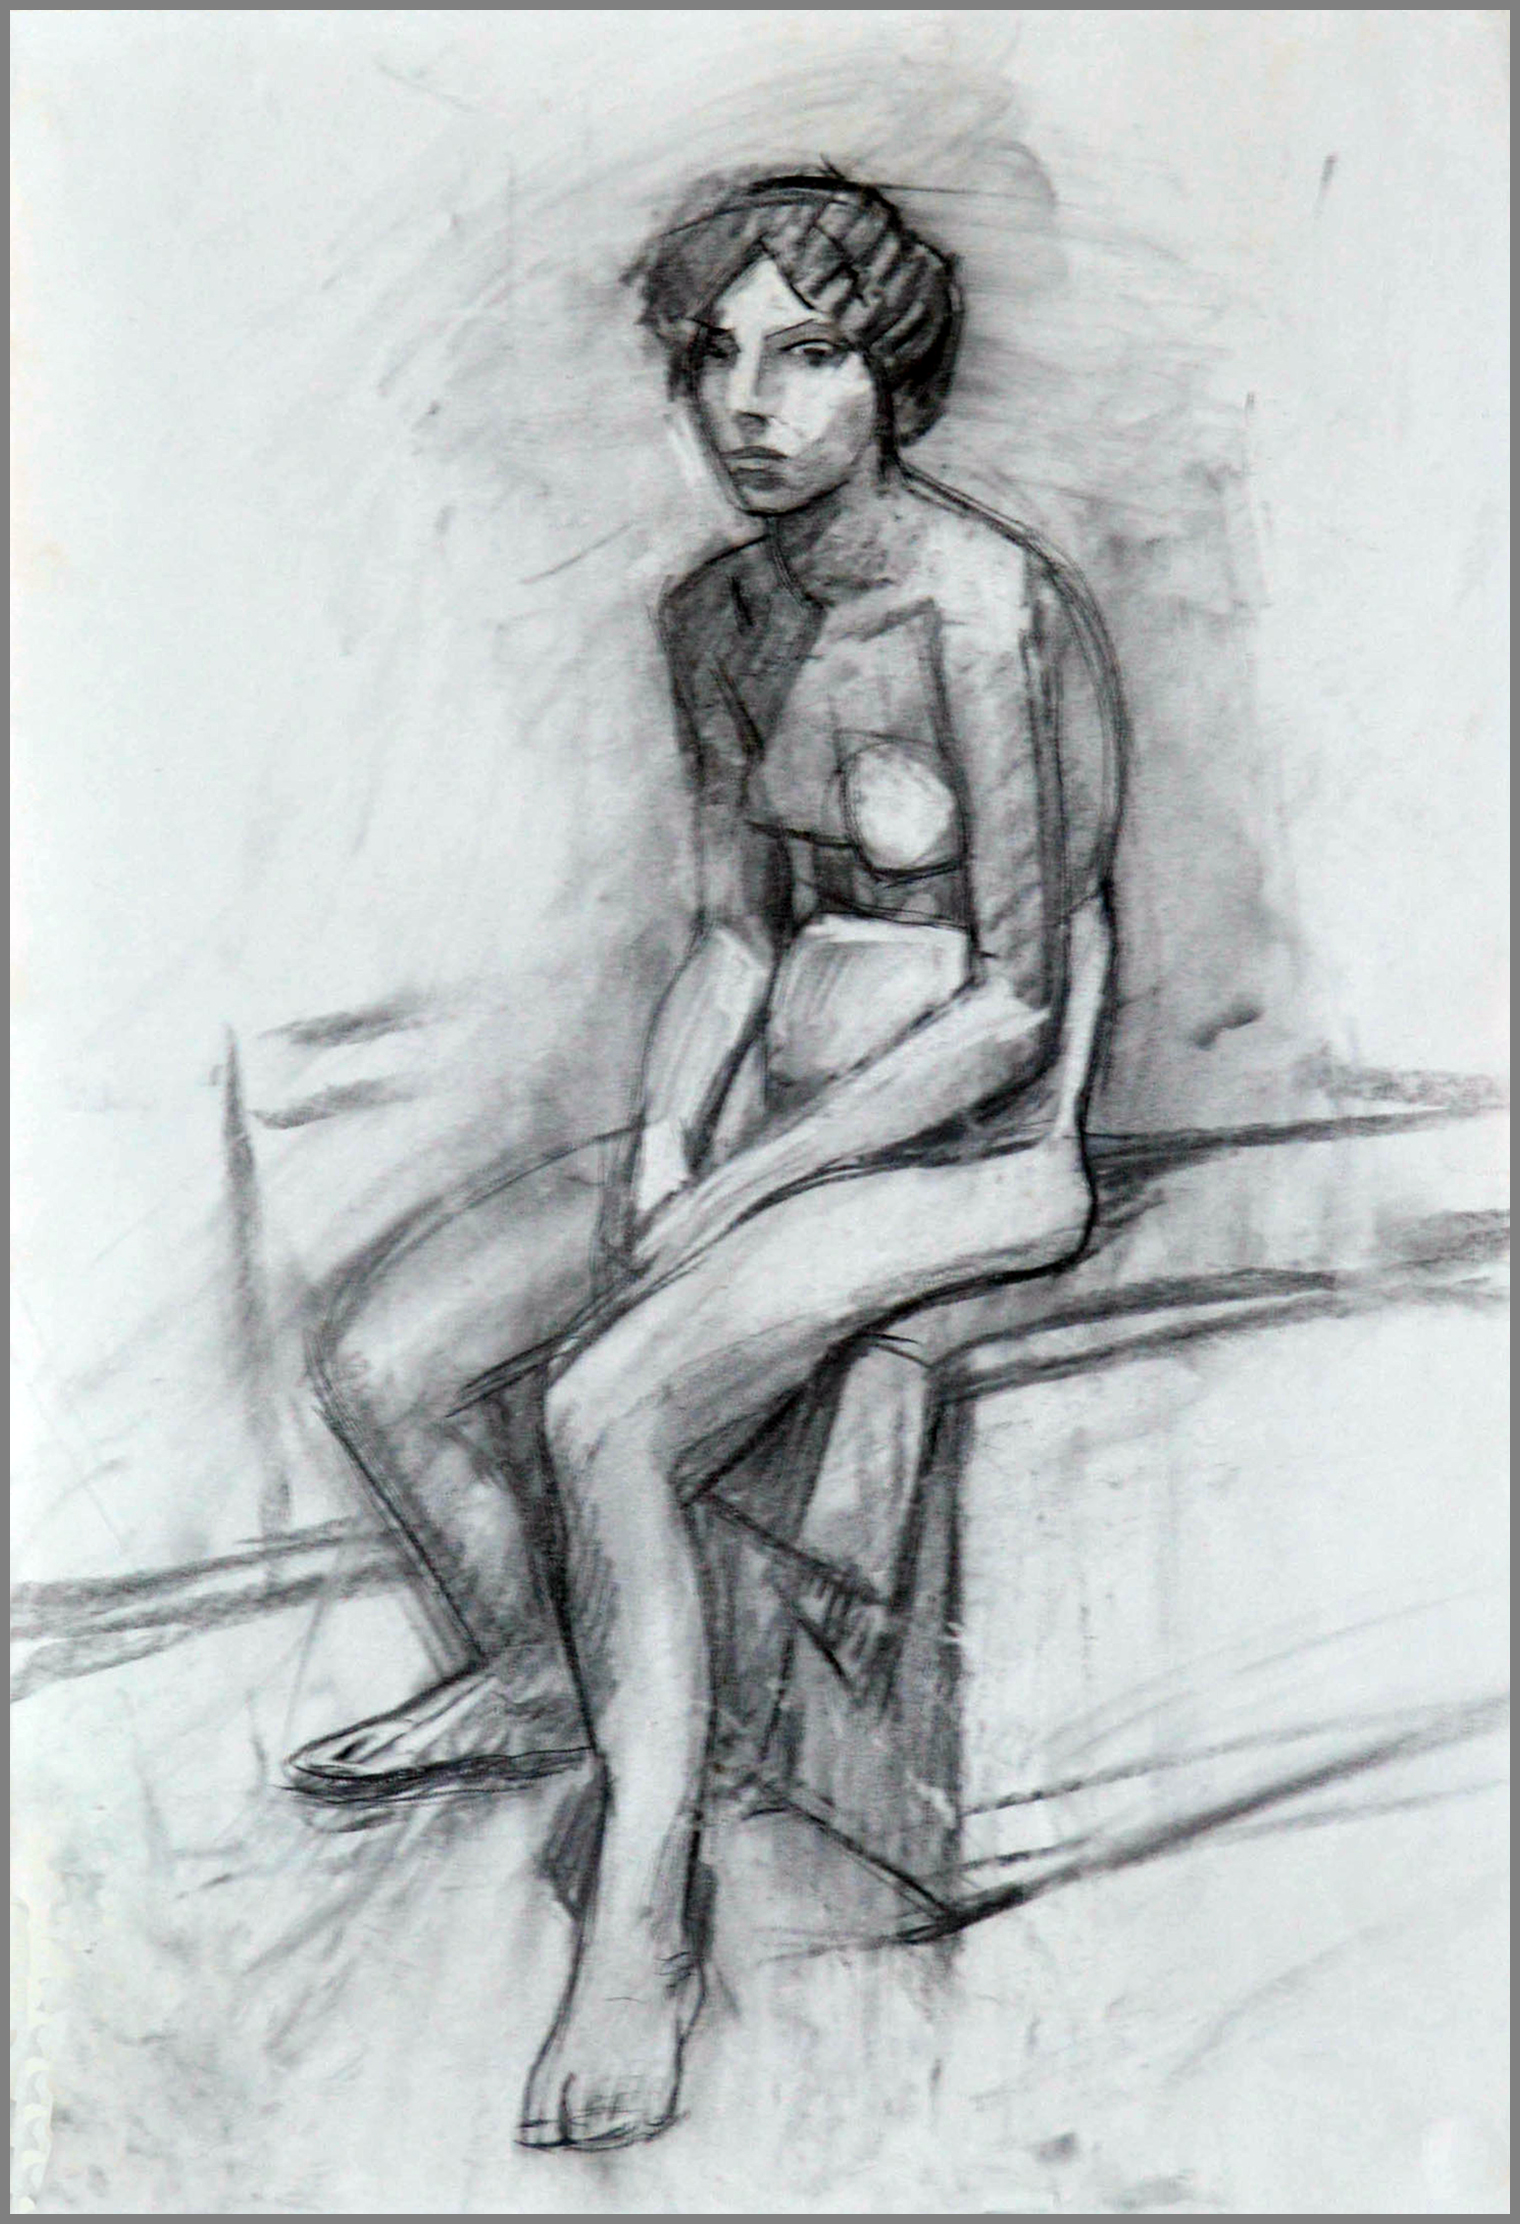  Seated Figure, charcoal, 24 x 18 inches 